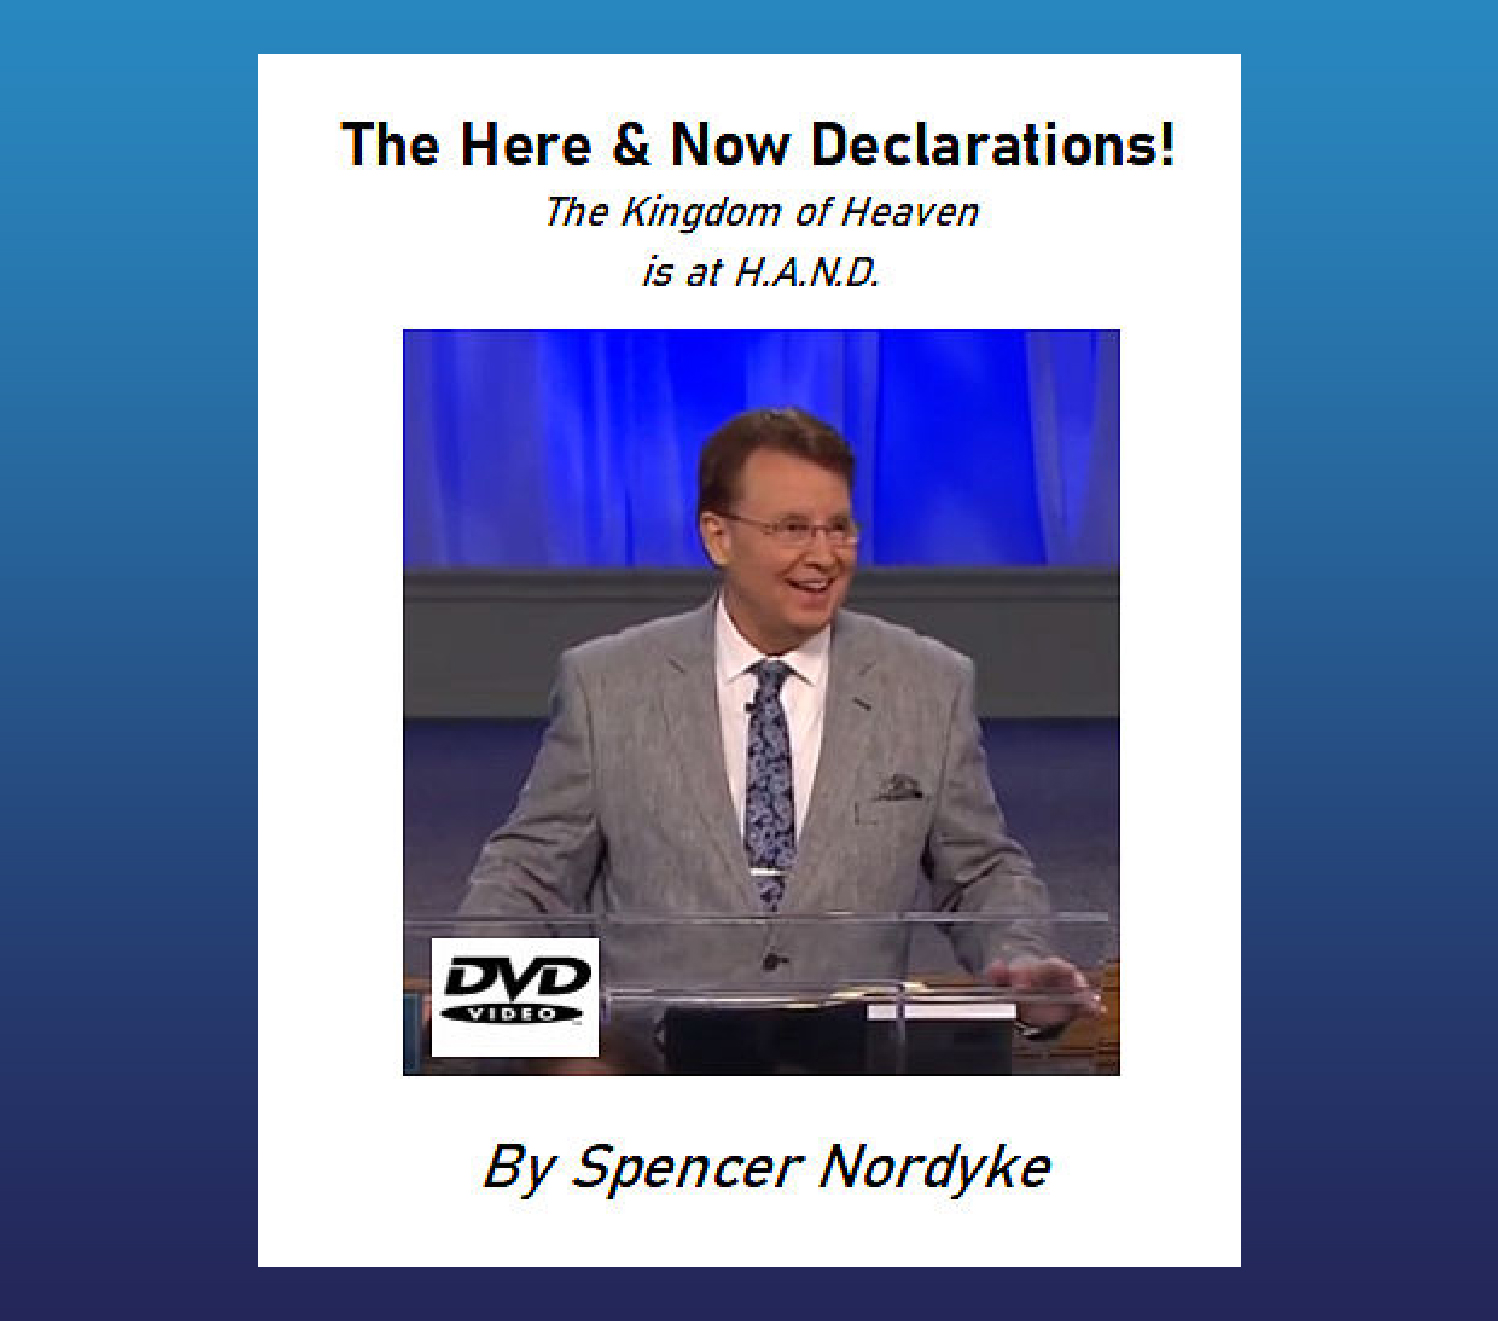 The Here and Now Declarations!  DVD